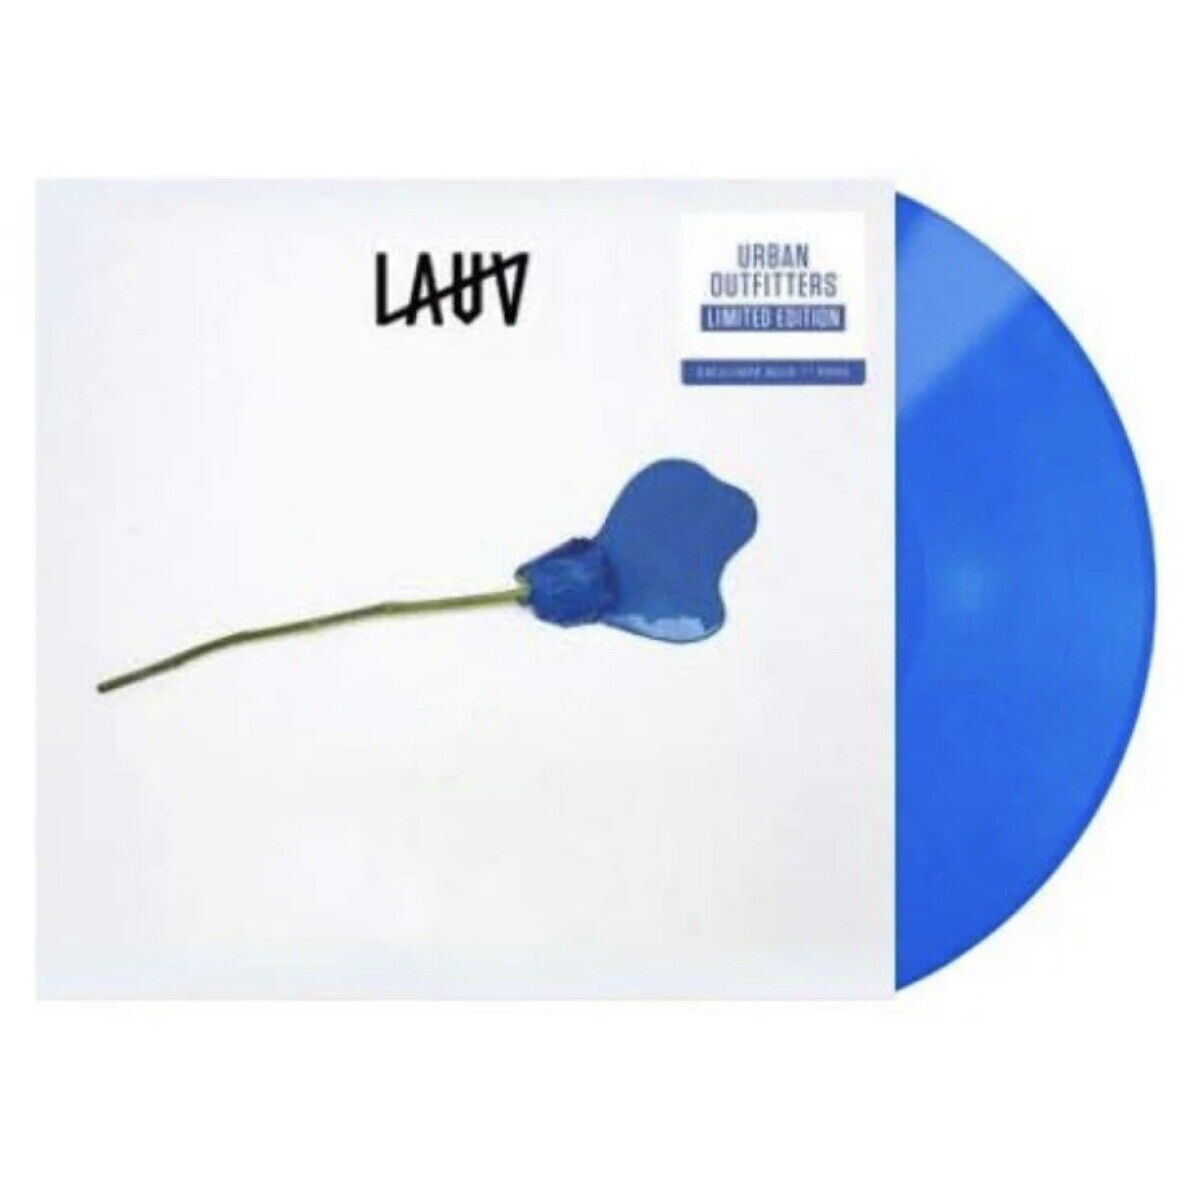 Lauv - I Like Me Better - 🔵 Blue Urban Outfitters Exclusive 7” Vinyl - New